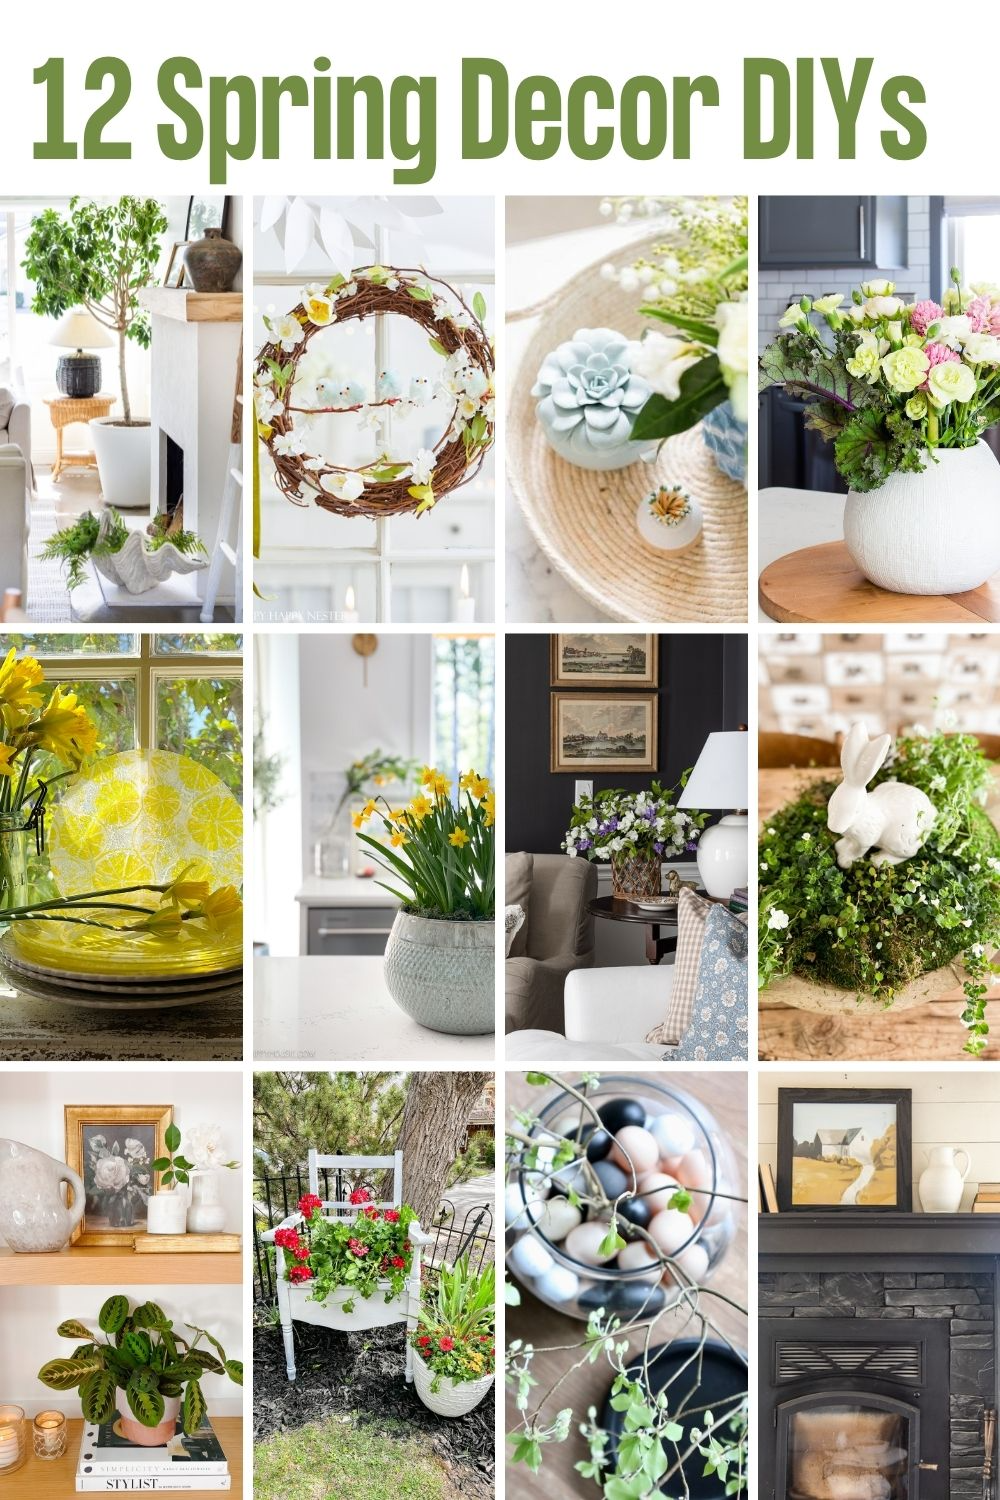 Spring Home Decor Trends for 2022 and What I Love via @modernglamhome